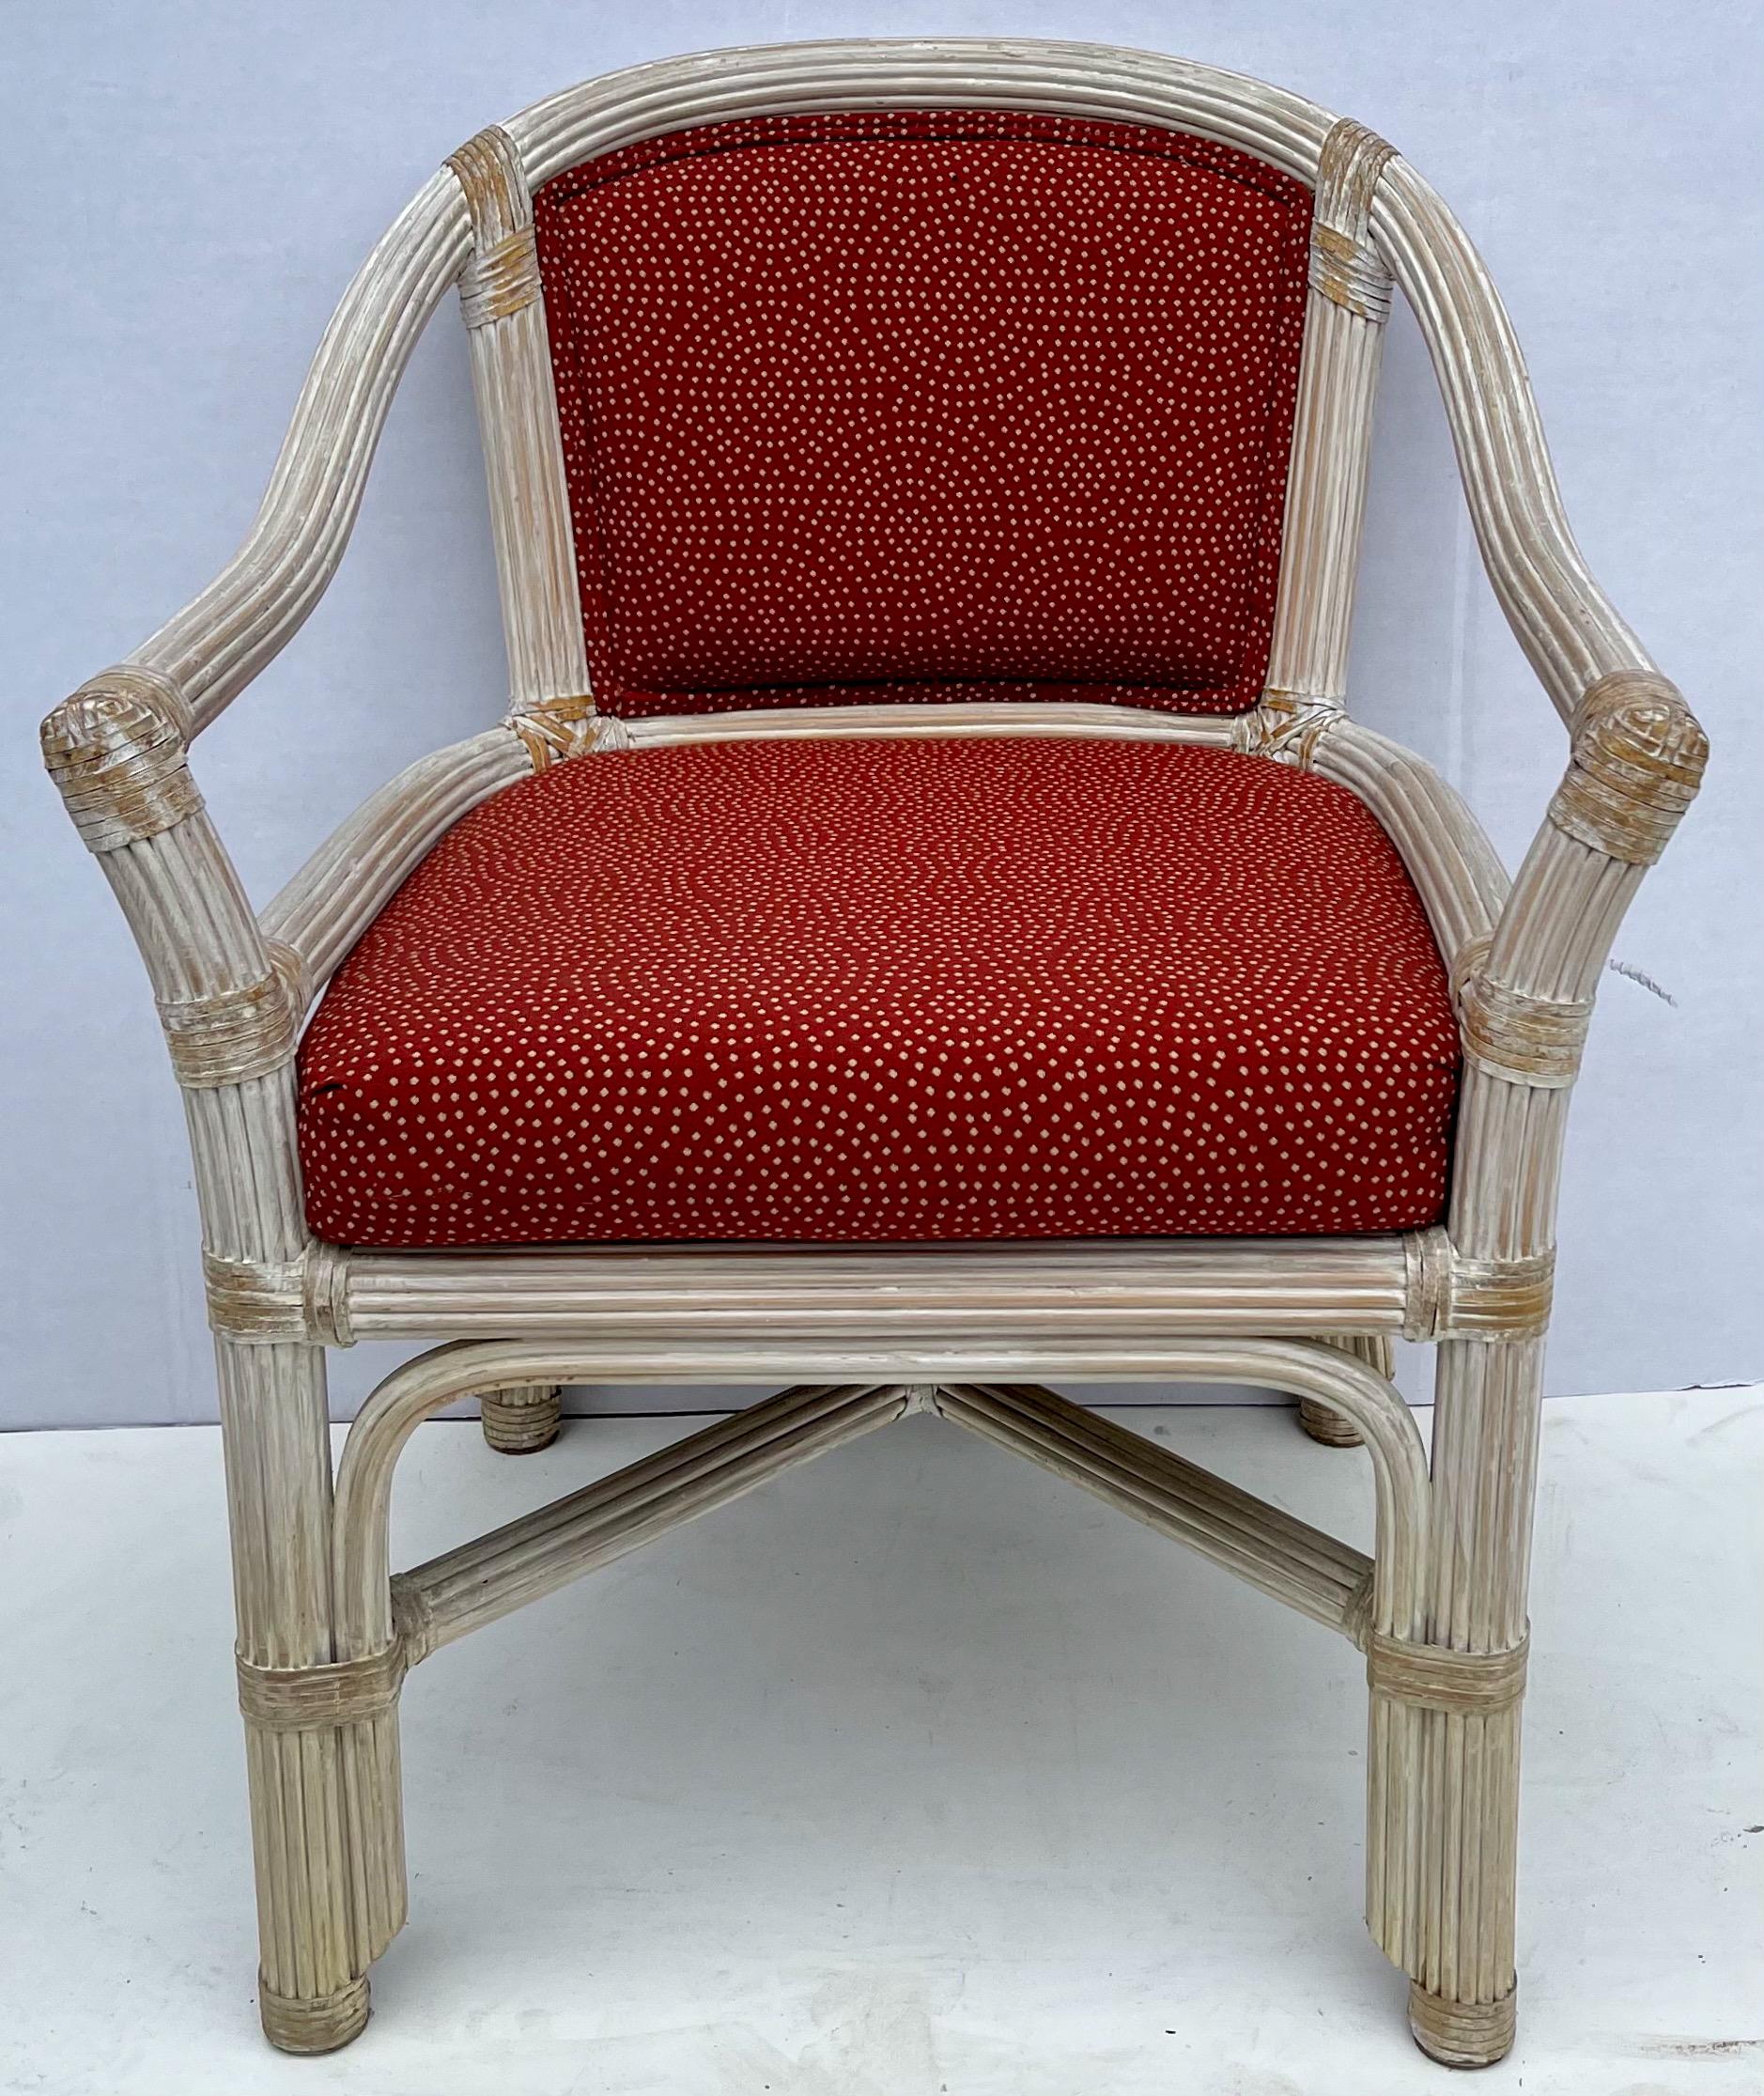 This is a nice set of cerused reeded pencil bamboo chairs by Henry Link. The upholstery is vintage but in very good condition. The chairs are marked.